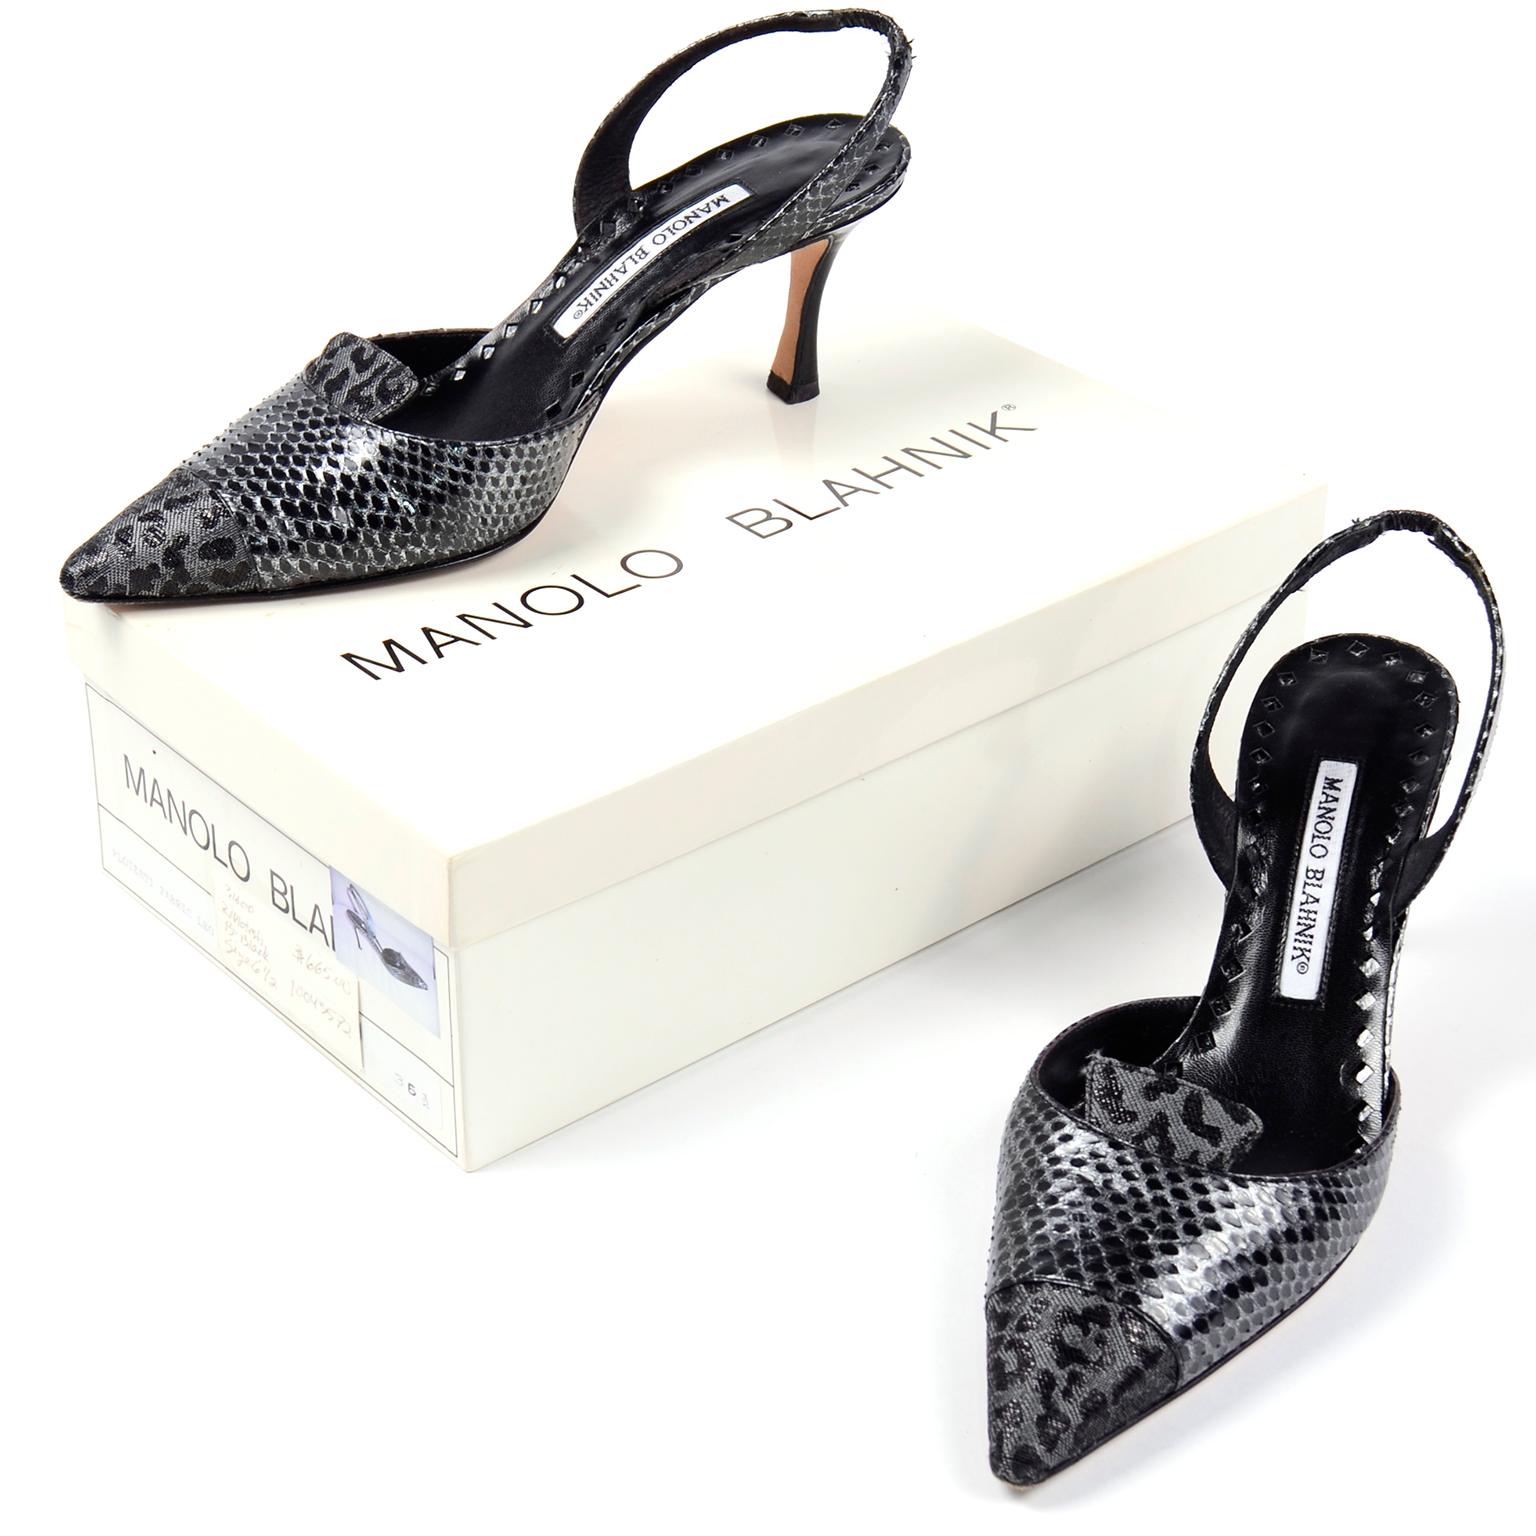 These black and grey leather snakeskin Manolo Blahniks slingbacks have leopard details and a faux 